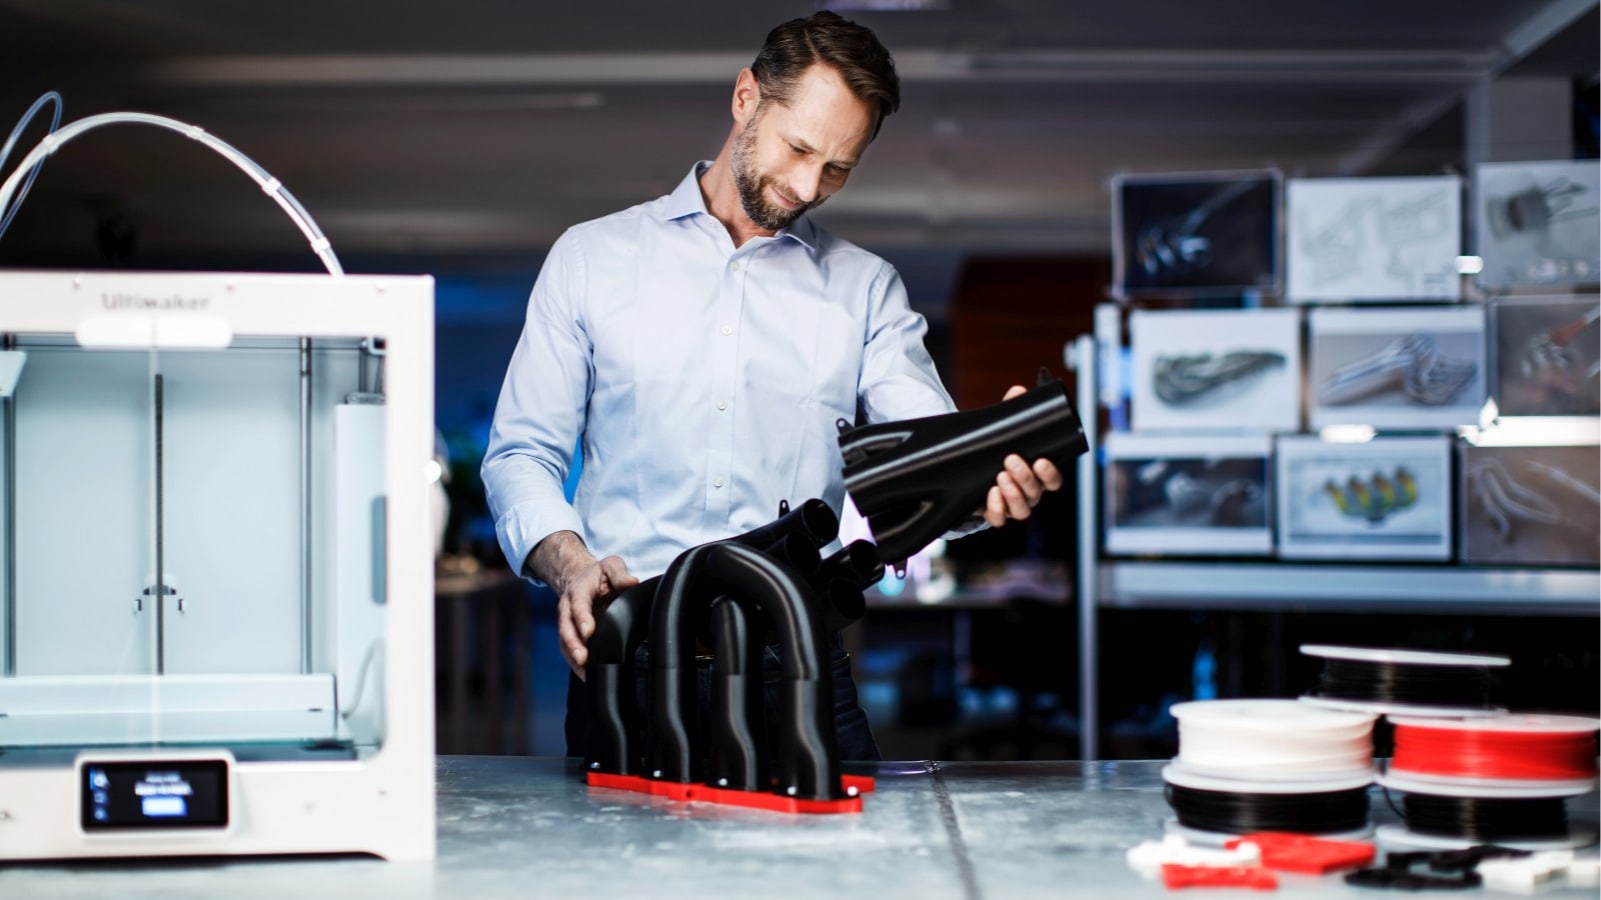 Gain quick access to in-house 3D printing with Ultimaker printers, software and standard profiles